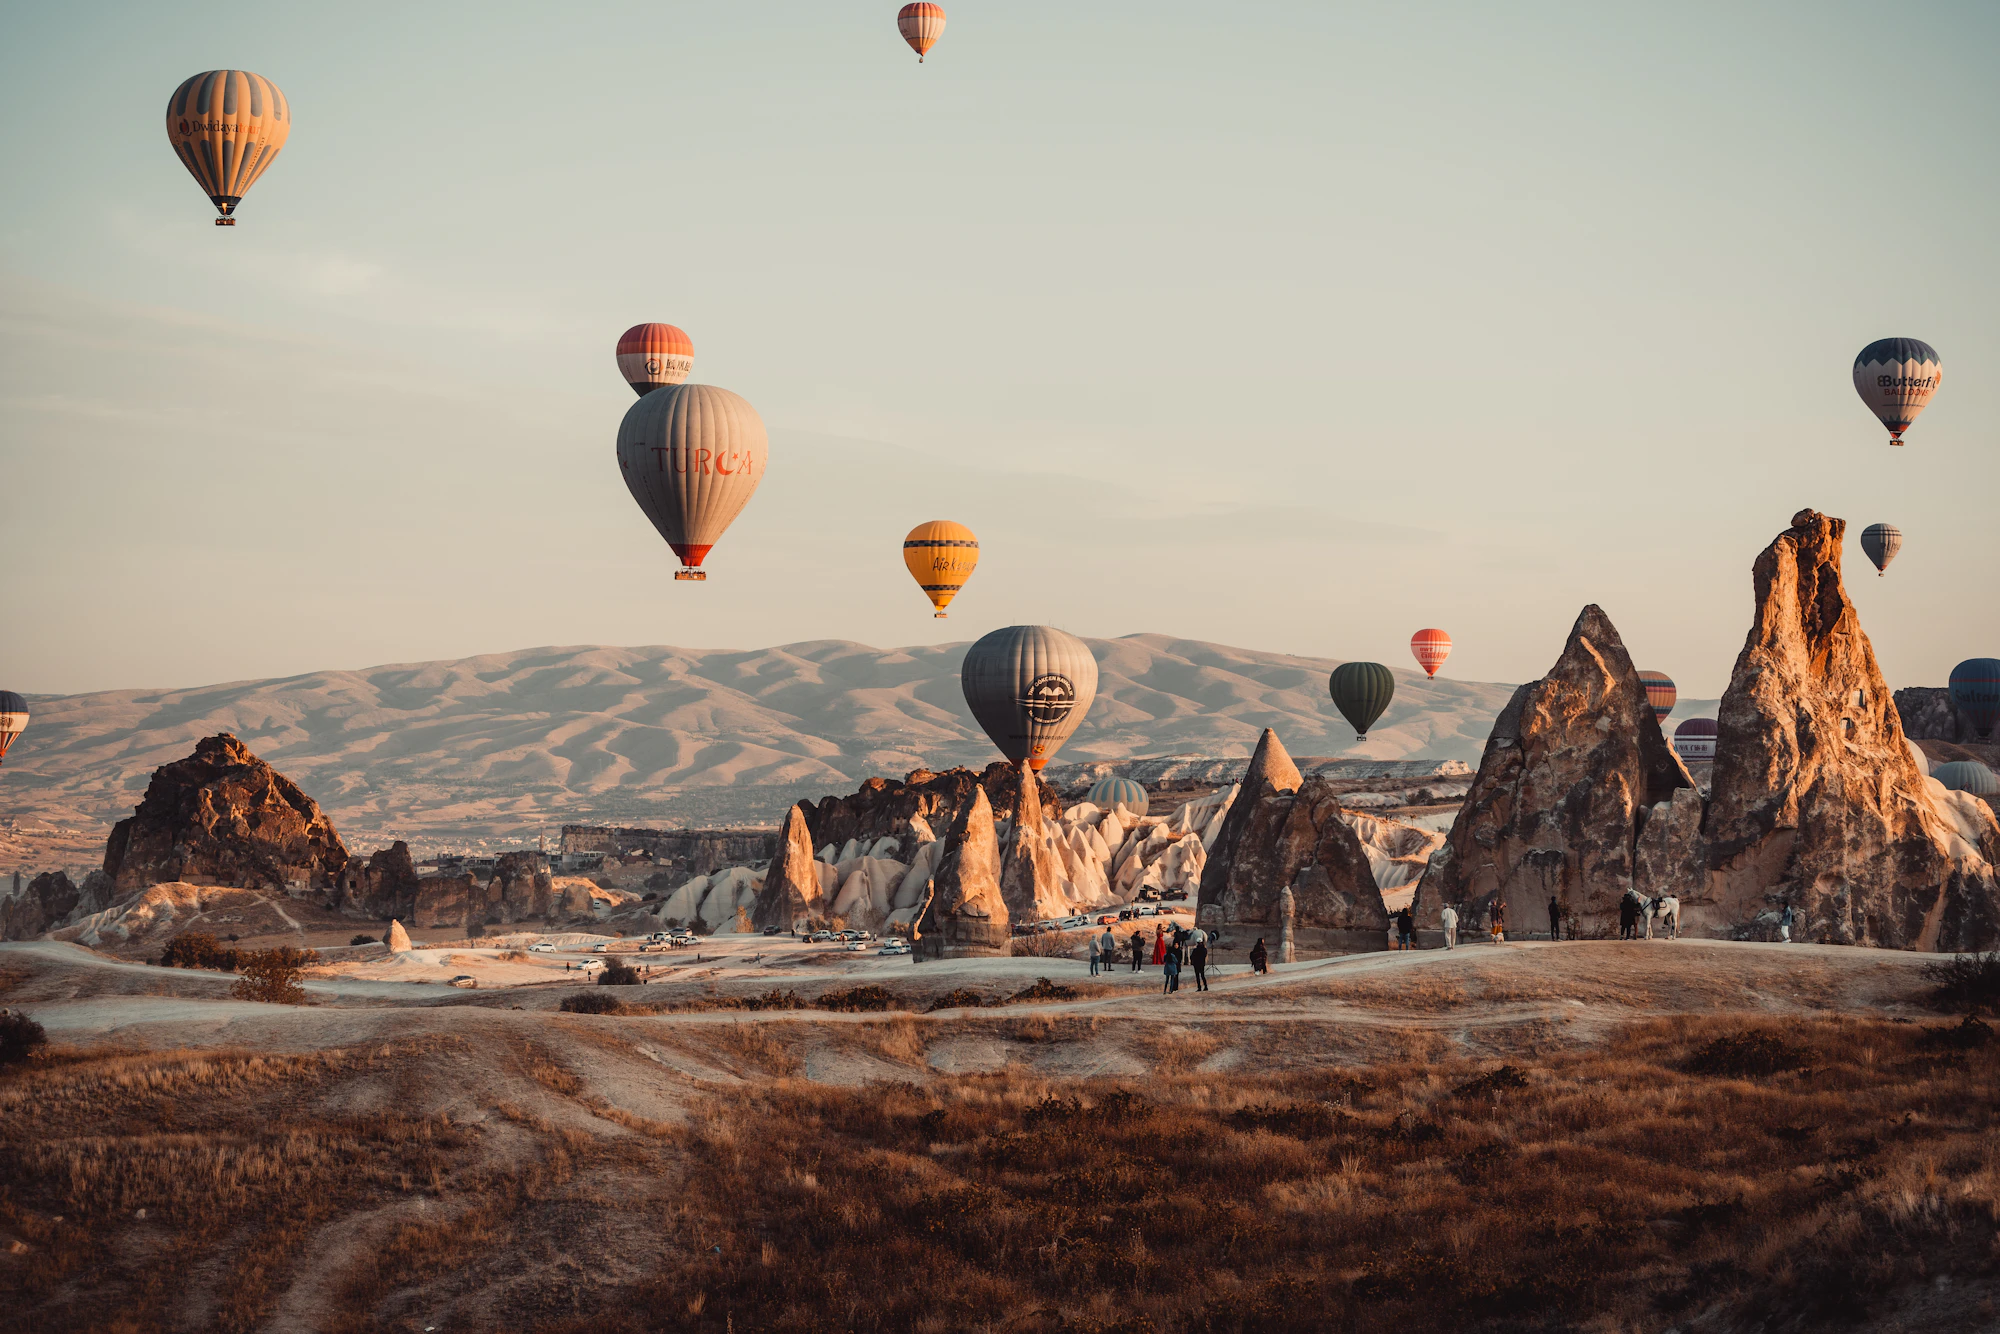 Chimneys of Cappadocia with hot air balloons in the background